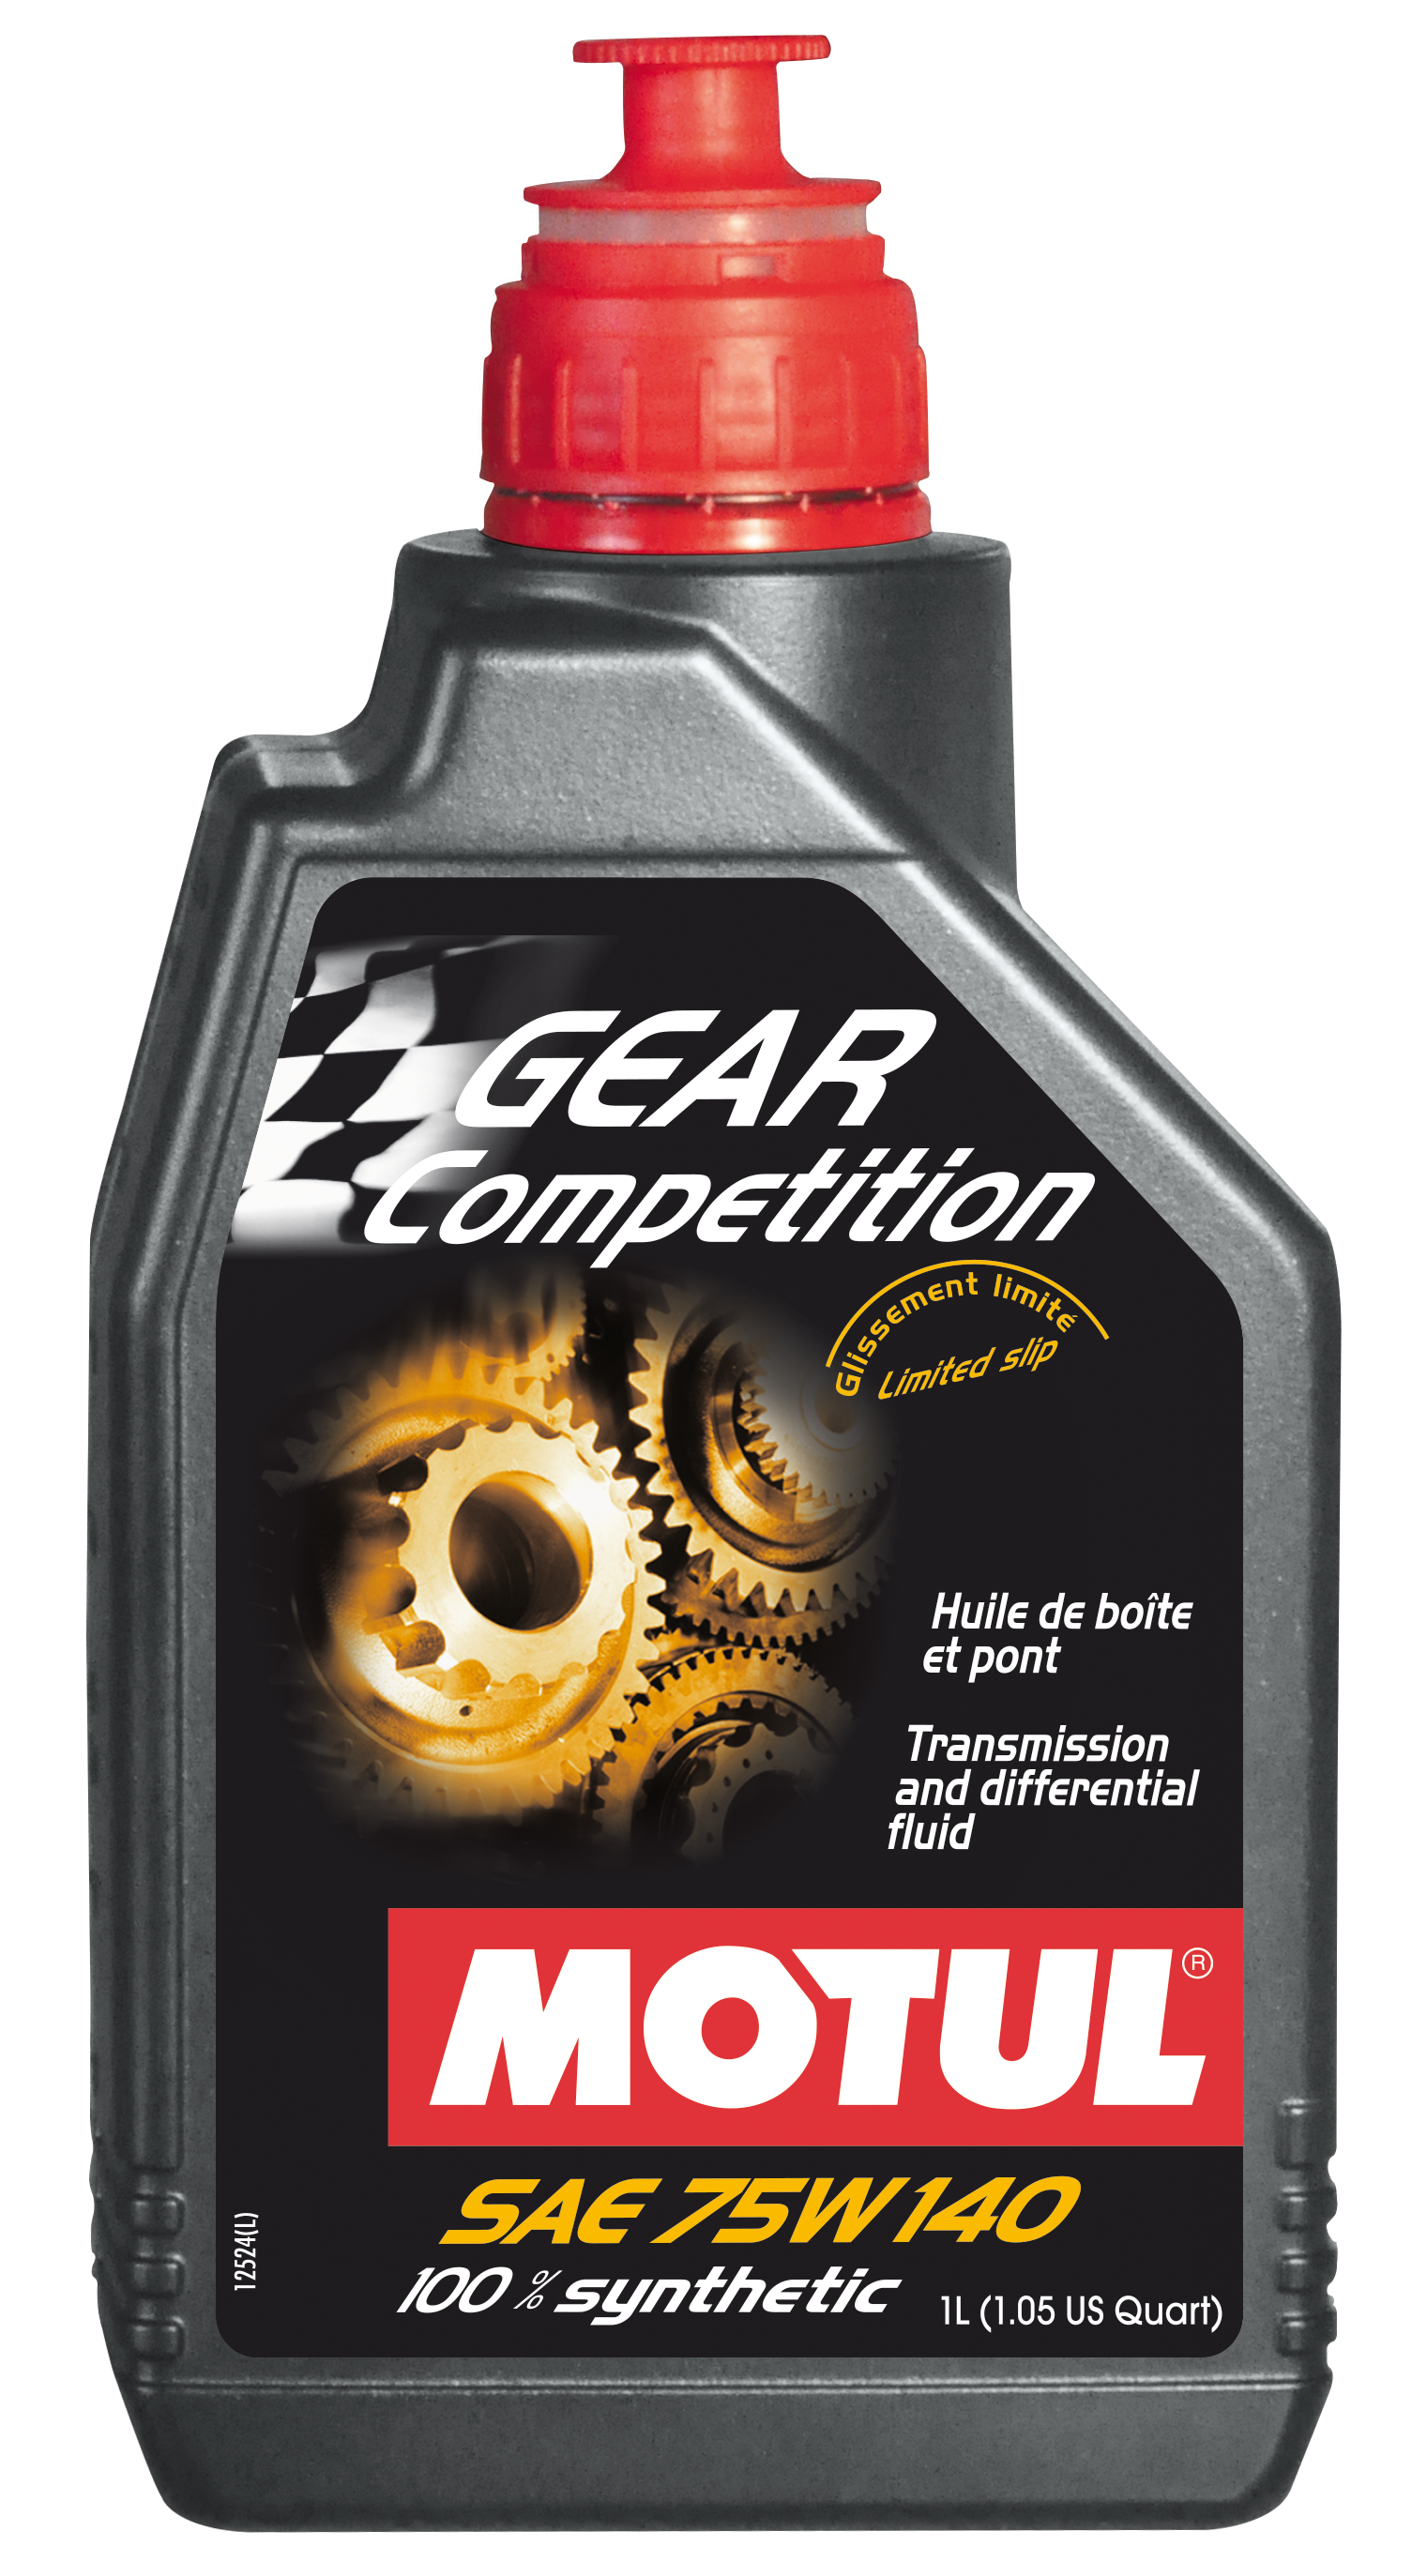 MOTUL GEAR COMPETITION 75W140 - 1L - Fully Synthetic Transmission fluid - Ester based